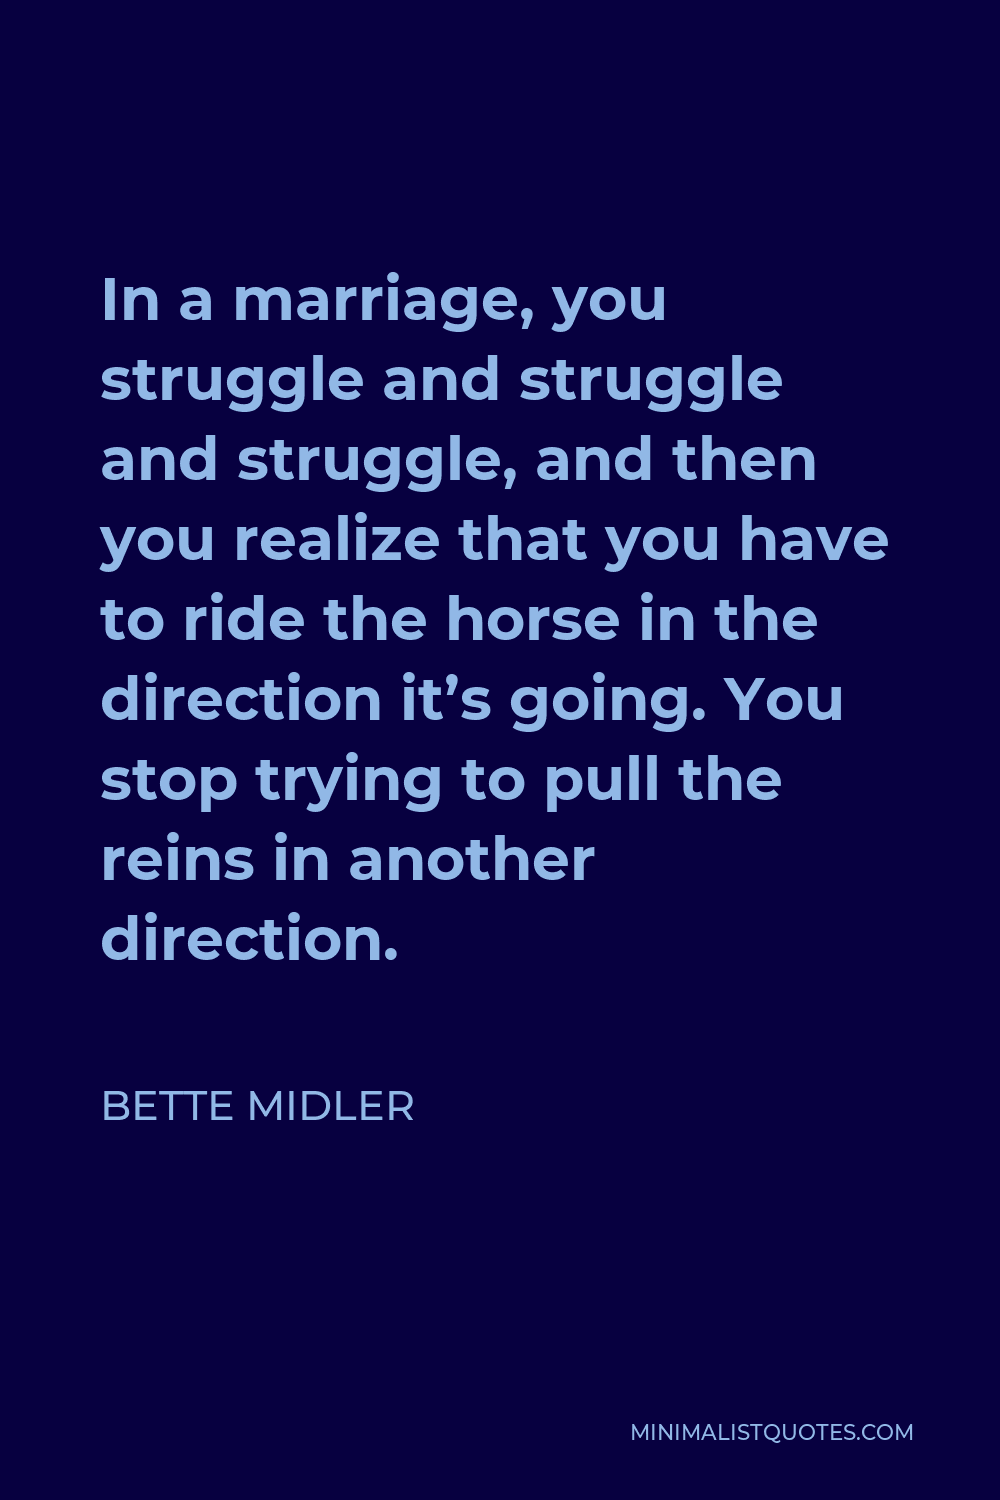 Bette Midler Quote - In a marriage, you struggle and struggle and struggle, and then you realize that you have to ride the horse in the direction it’s going. You stop trying to pull the reins in another direction.